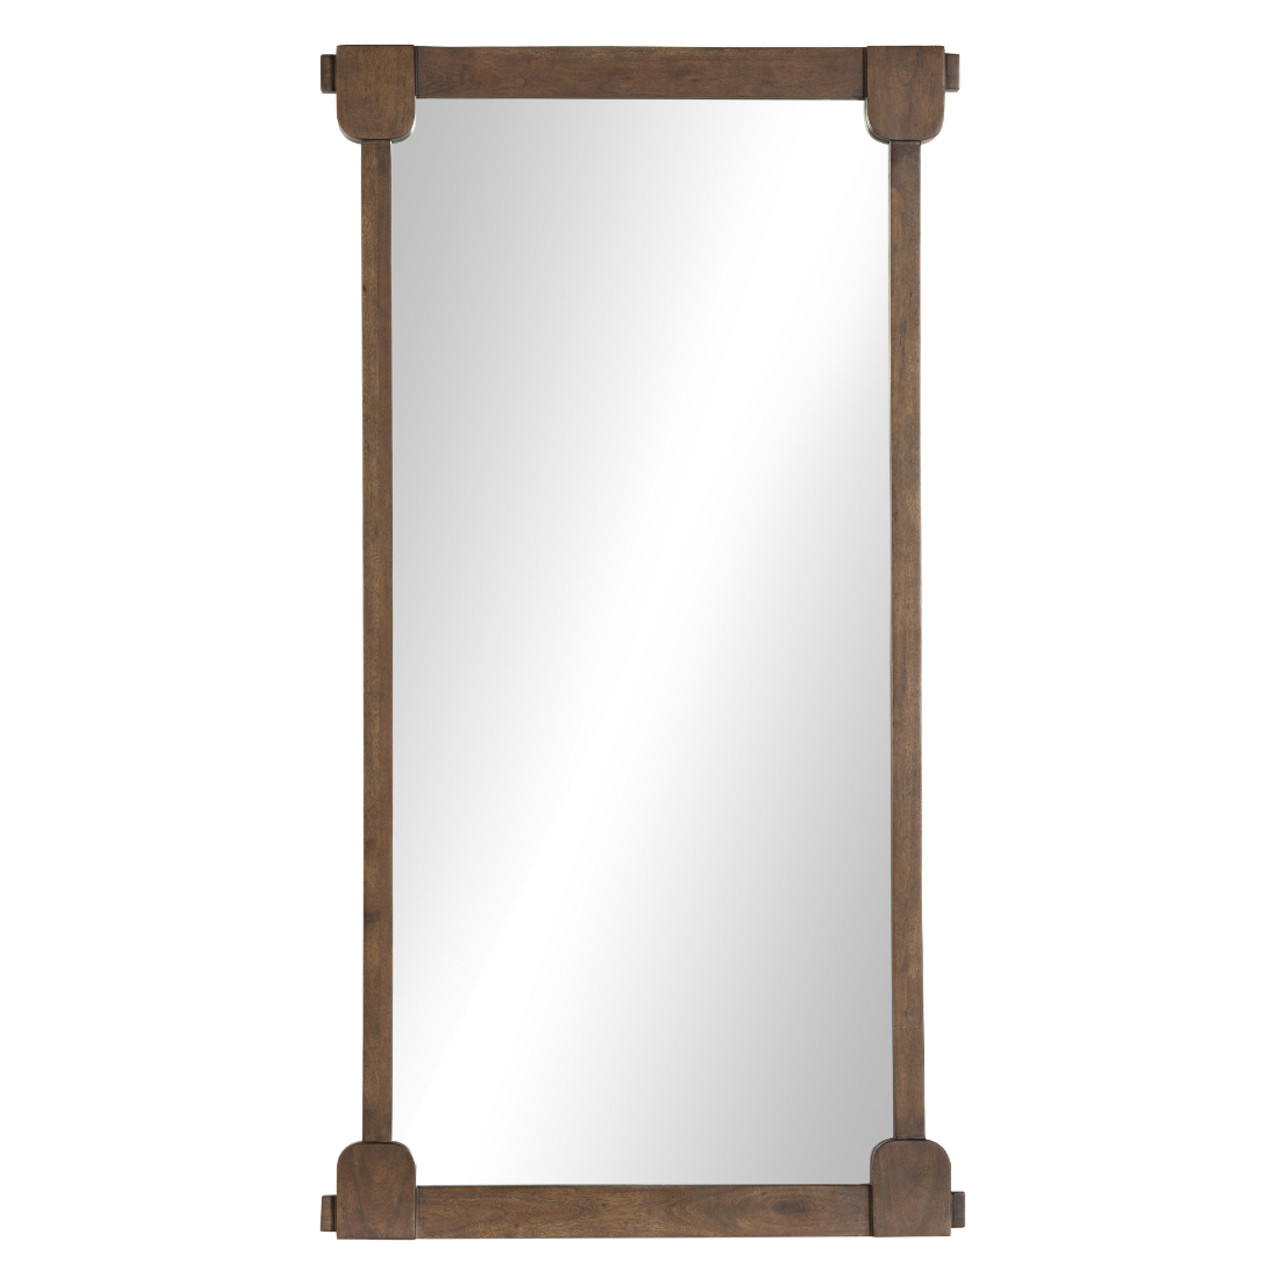 Sheesham Wood Full Length Floor Mirror With Stand at Rs 6548/piece, Minimalist Mirrors in Surendranagar